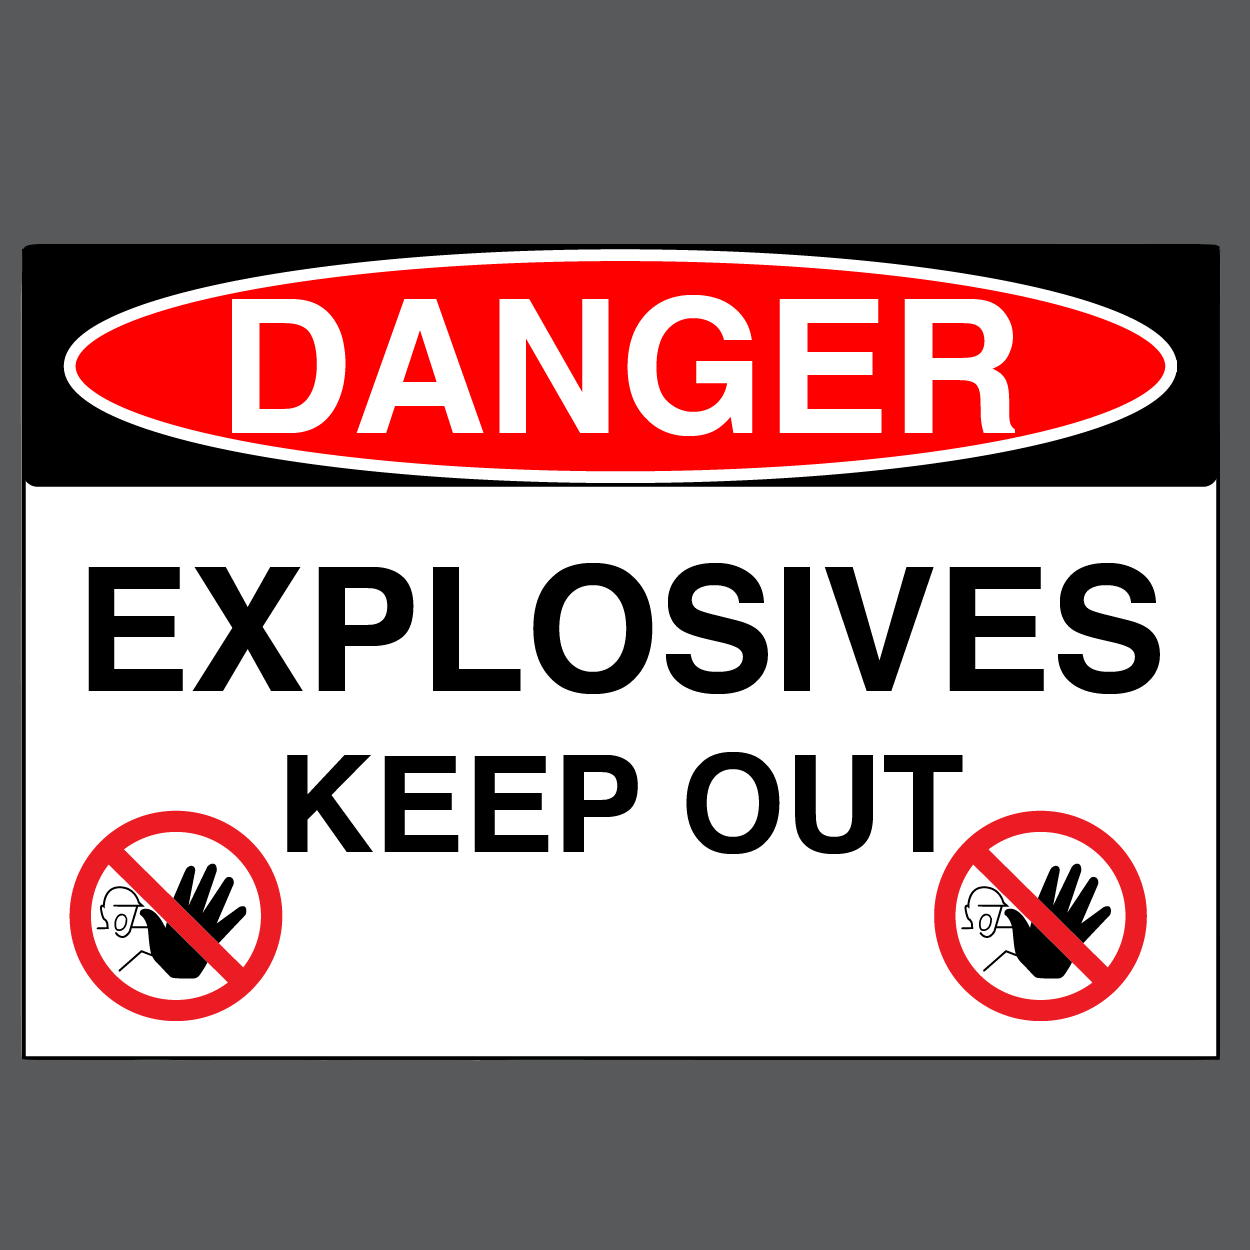 Danger "Explosives Keep Out" Version 1, Durable Matte Laminated Vinyl Floor Sign- Various Sizes Available